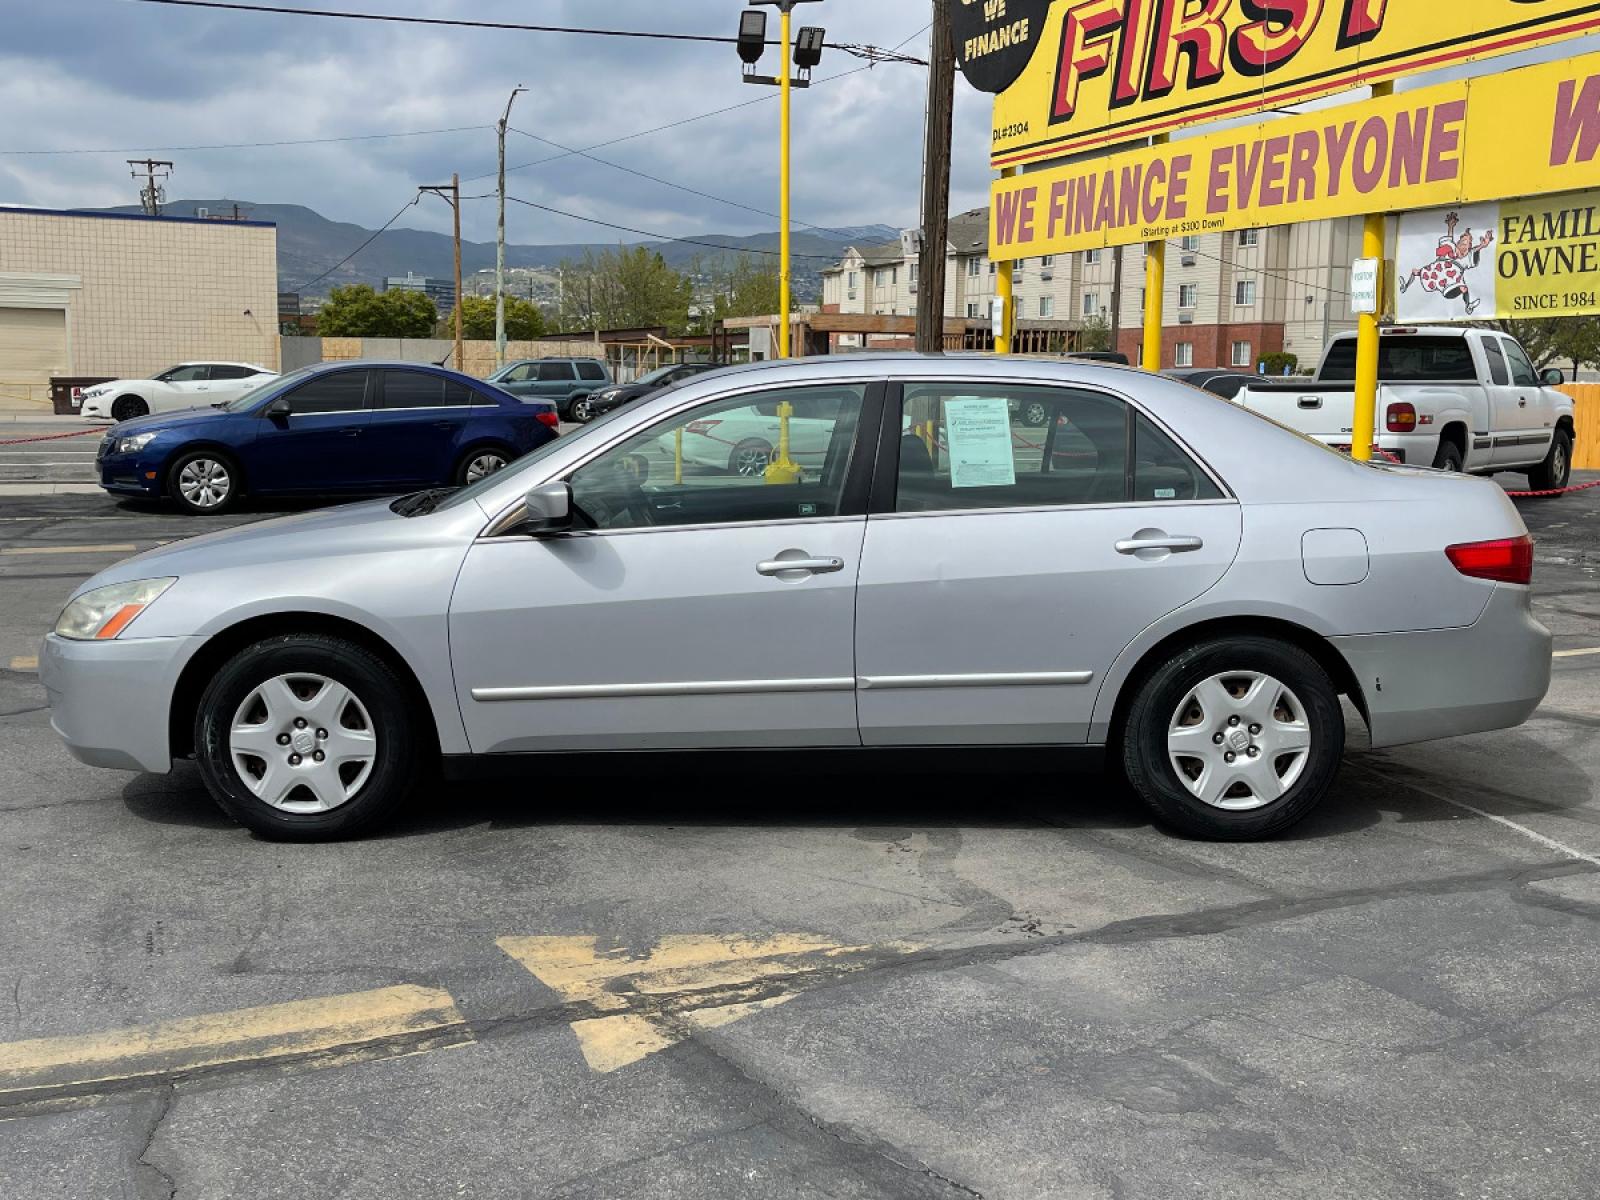 2005 Satin Silver Metallic /Gray Cloth Honda Accord LX (1HGCM56405A) with an 2.4L 4 Cyl. engine, Automatic transmission, located at 801 South State Street, Salt Lake City, UT, 84111, (801) 328-0098, 40.751953, -111.888206 - *MILEAGE DISCREPANCY ACCORDING TO CARFAX REPORT! TRUE MILES UNKNOWN!* Life is crazy. Now is the time to buy! All of our prices are just dollars above our cost. These prices will change as soon as life isn't so crazy. So please call or come in. We are here to save you a lot of money! Our s - Photo #1